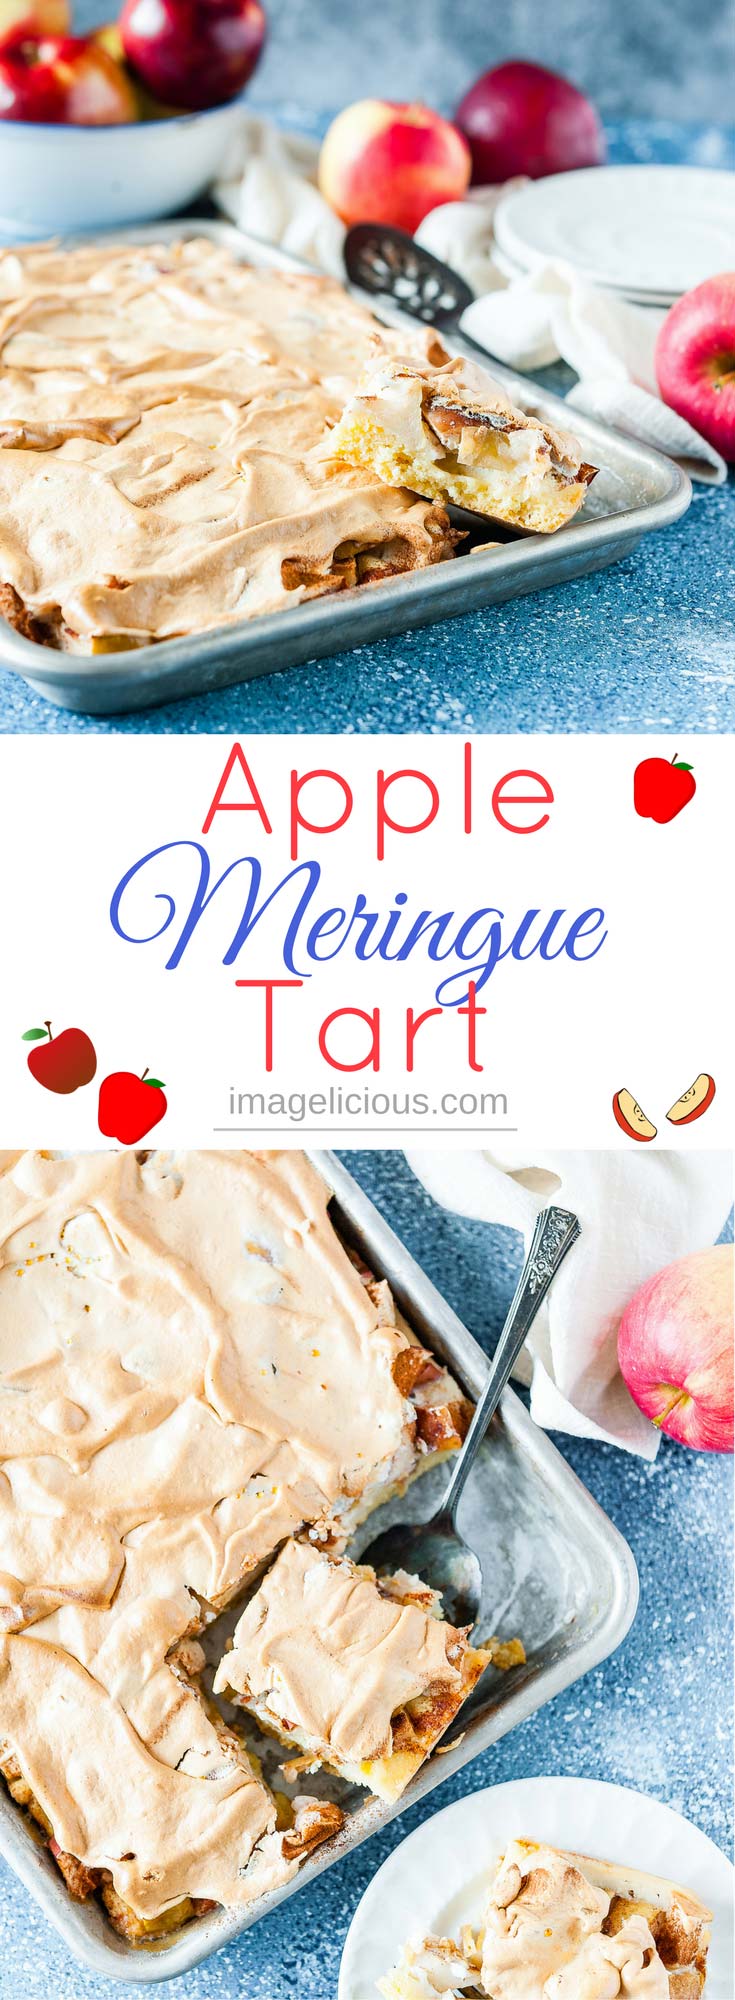 This Apple Meringue Tart is a gorgeous and delicious dessert at any time of the year. It looks beautiful and tastes festive and elegant. With a touch of cinnamon and soft and pillowy meringue topping | Imagelicious #Apples #AppleBaking #Meringues #Tarts #Dessert #OnAppleADay